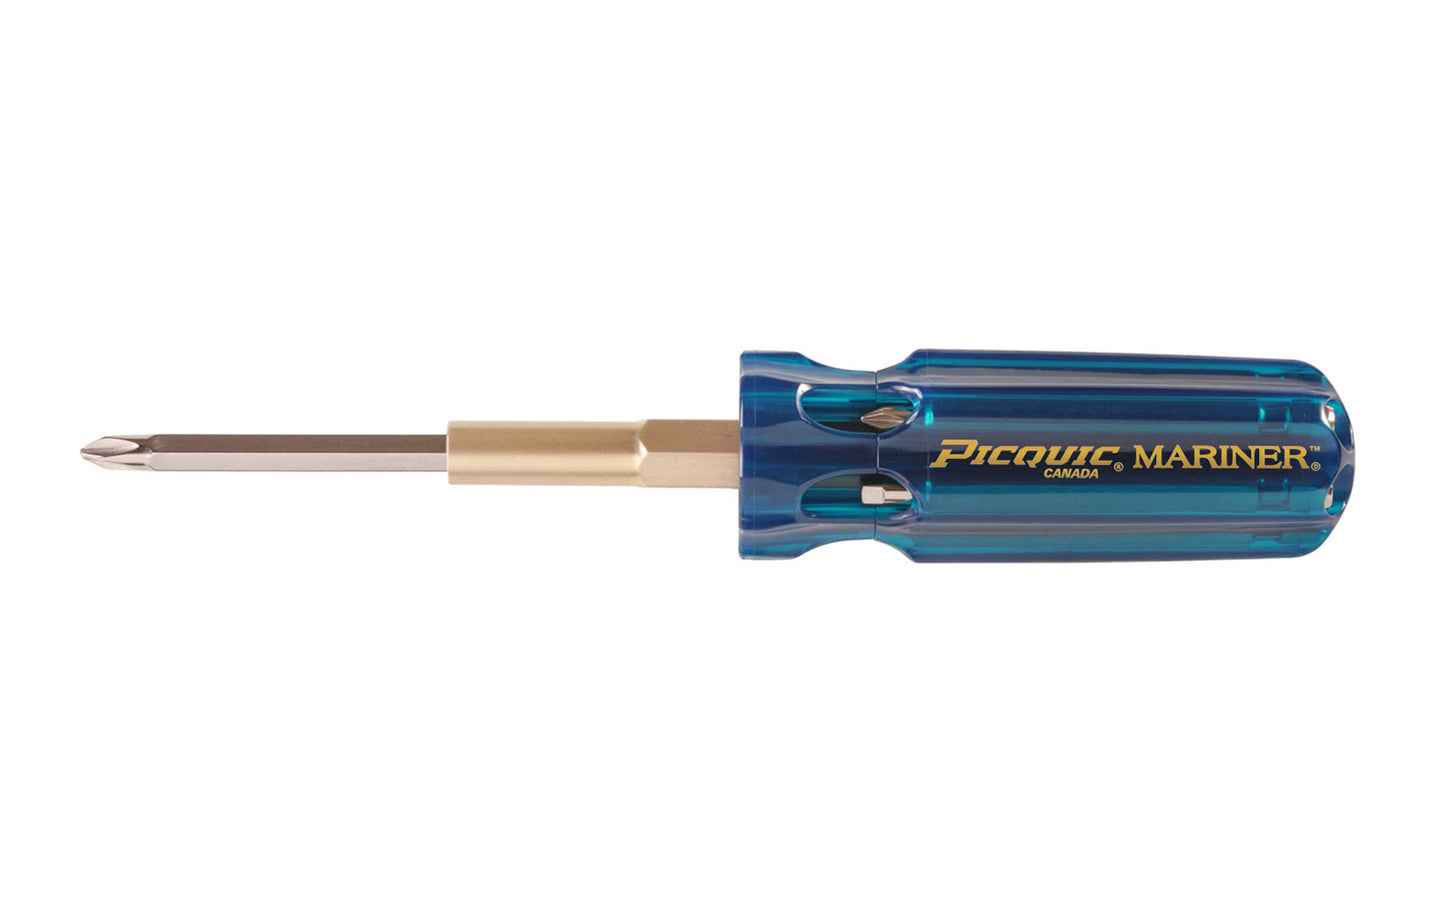 Handle made in Canada ~ Model No. 88102B. Multi-bit Picquic "Mariner" screwdriver is perfect for any marine environment. It has Electroless nickel plated bits to resist corrosion. Bits included: #1, #2, #3 philips, #2 square, 1/8", 1/4",  3/16" slotted. Bit storage in handle. 57369881054. Marine grade anti-corrosive